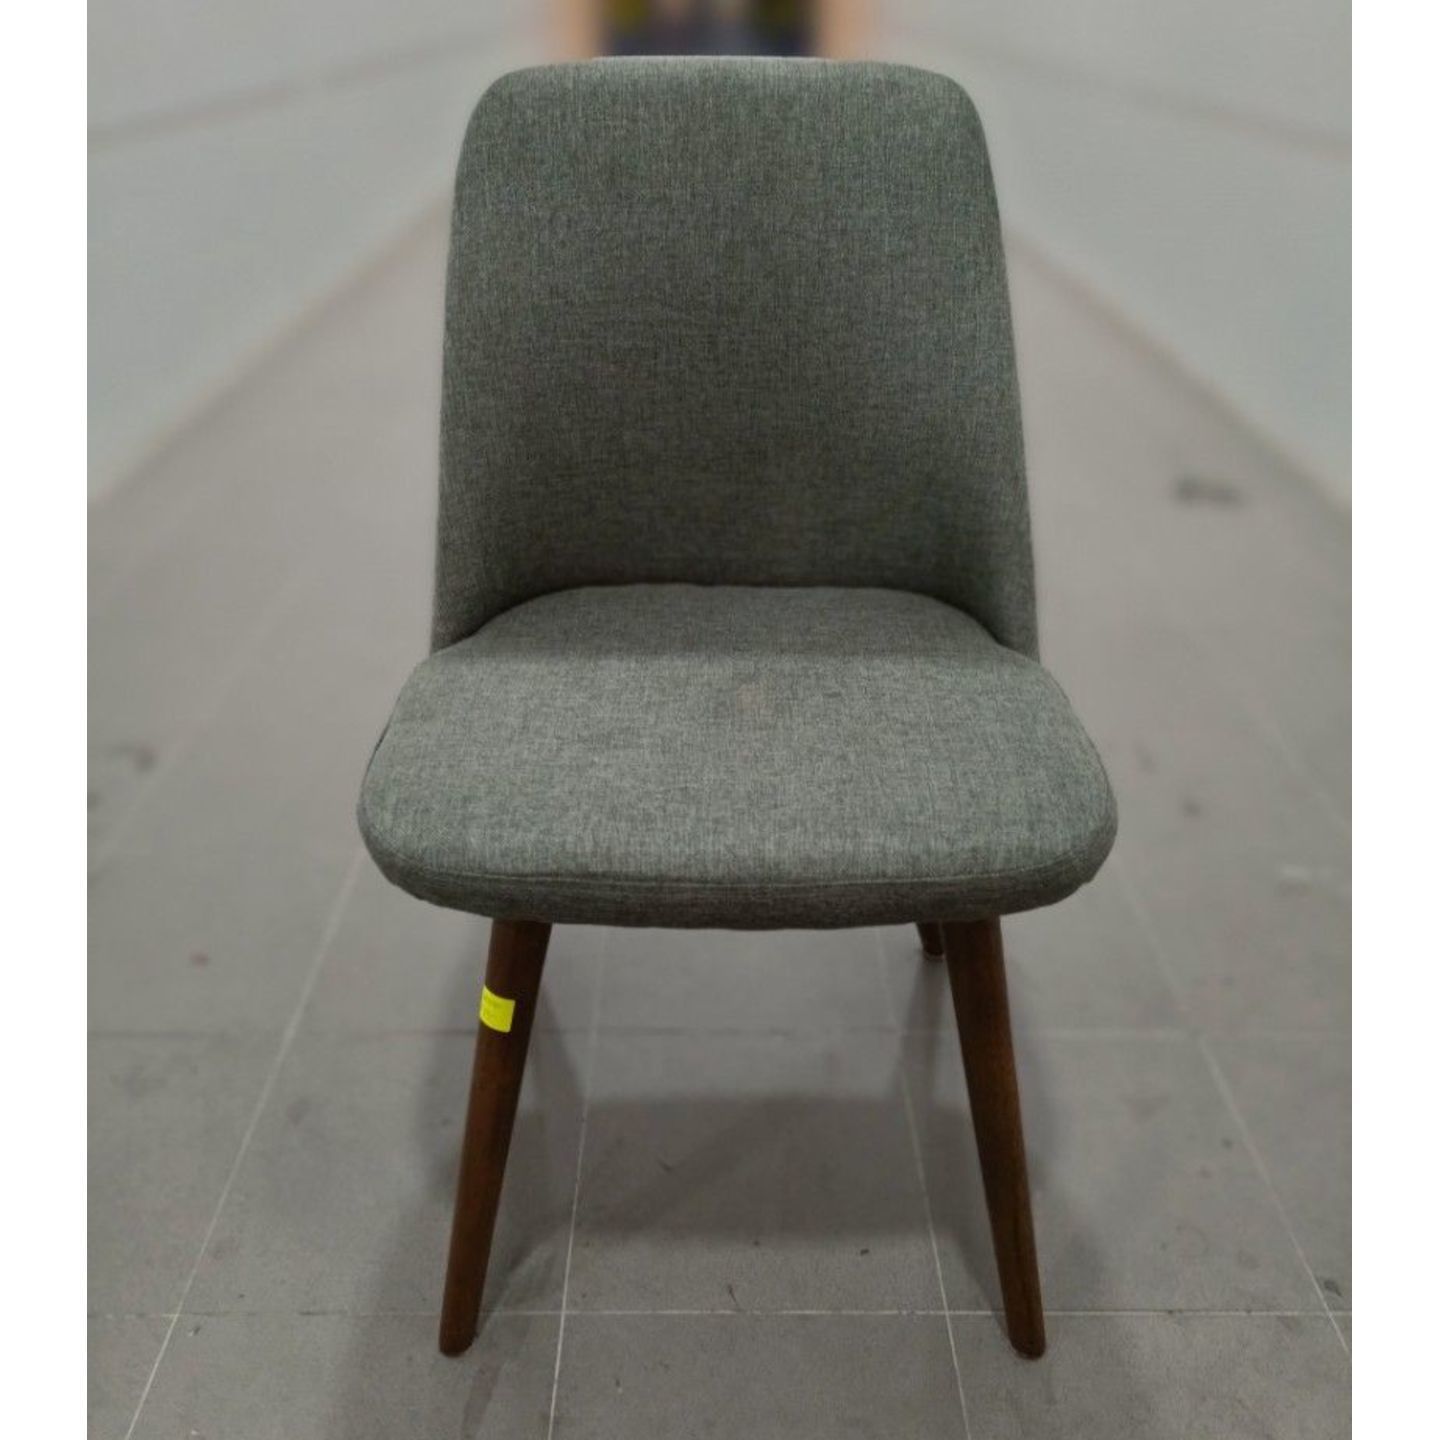 FIRE SALE - JEPA Dining Chair in WALNUT & GREY FABRIC (only piece)